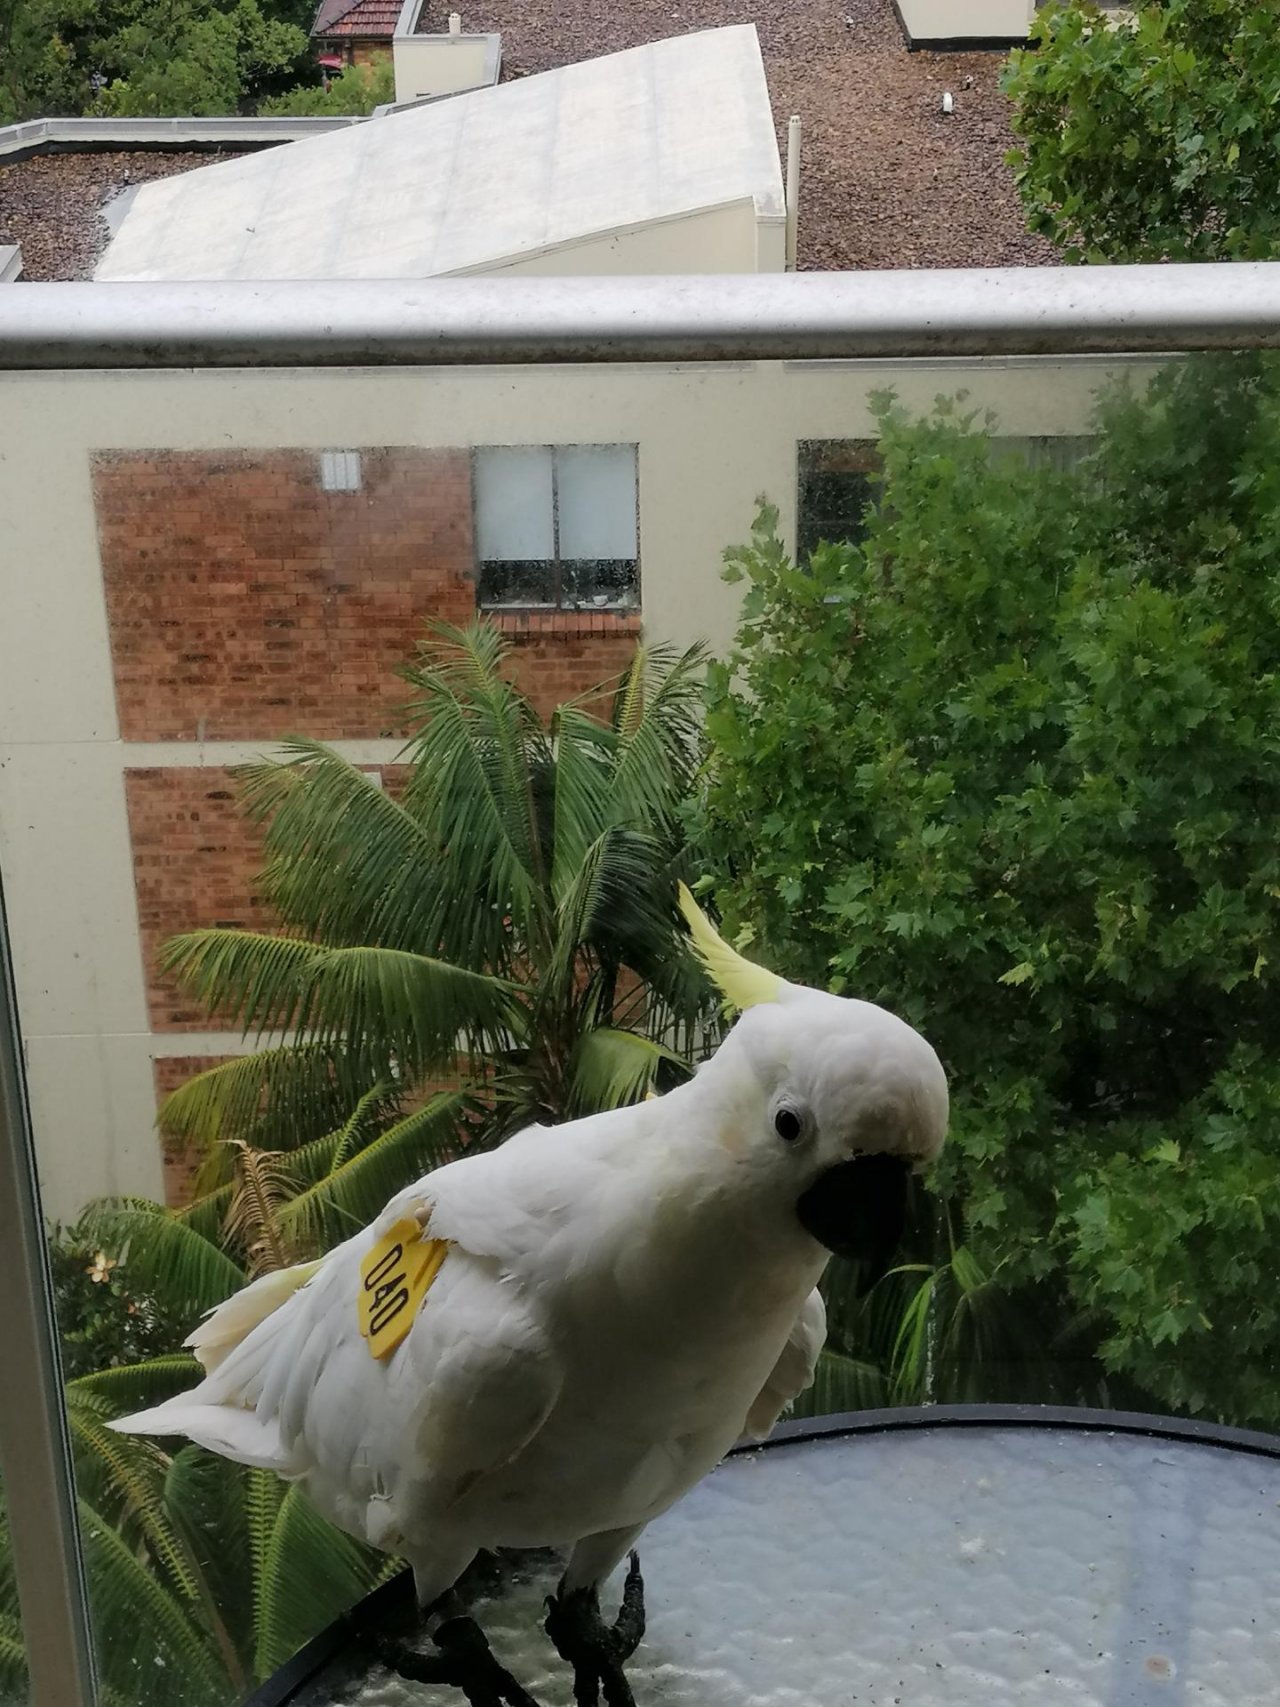 Sulphur-crested Cockatoo in Big City Birds App spotted by Loudboy on 21.12.2020